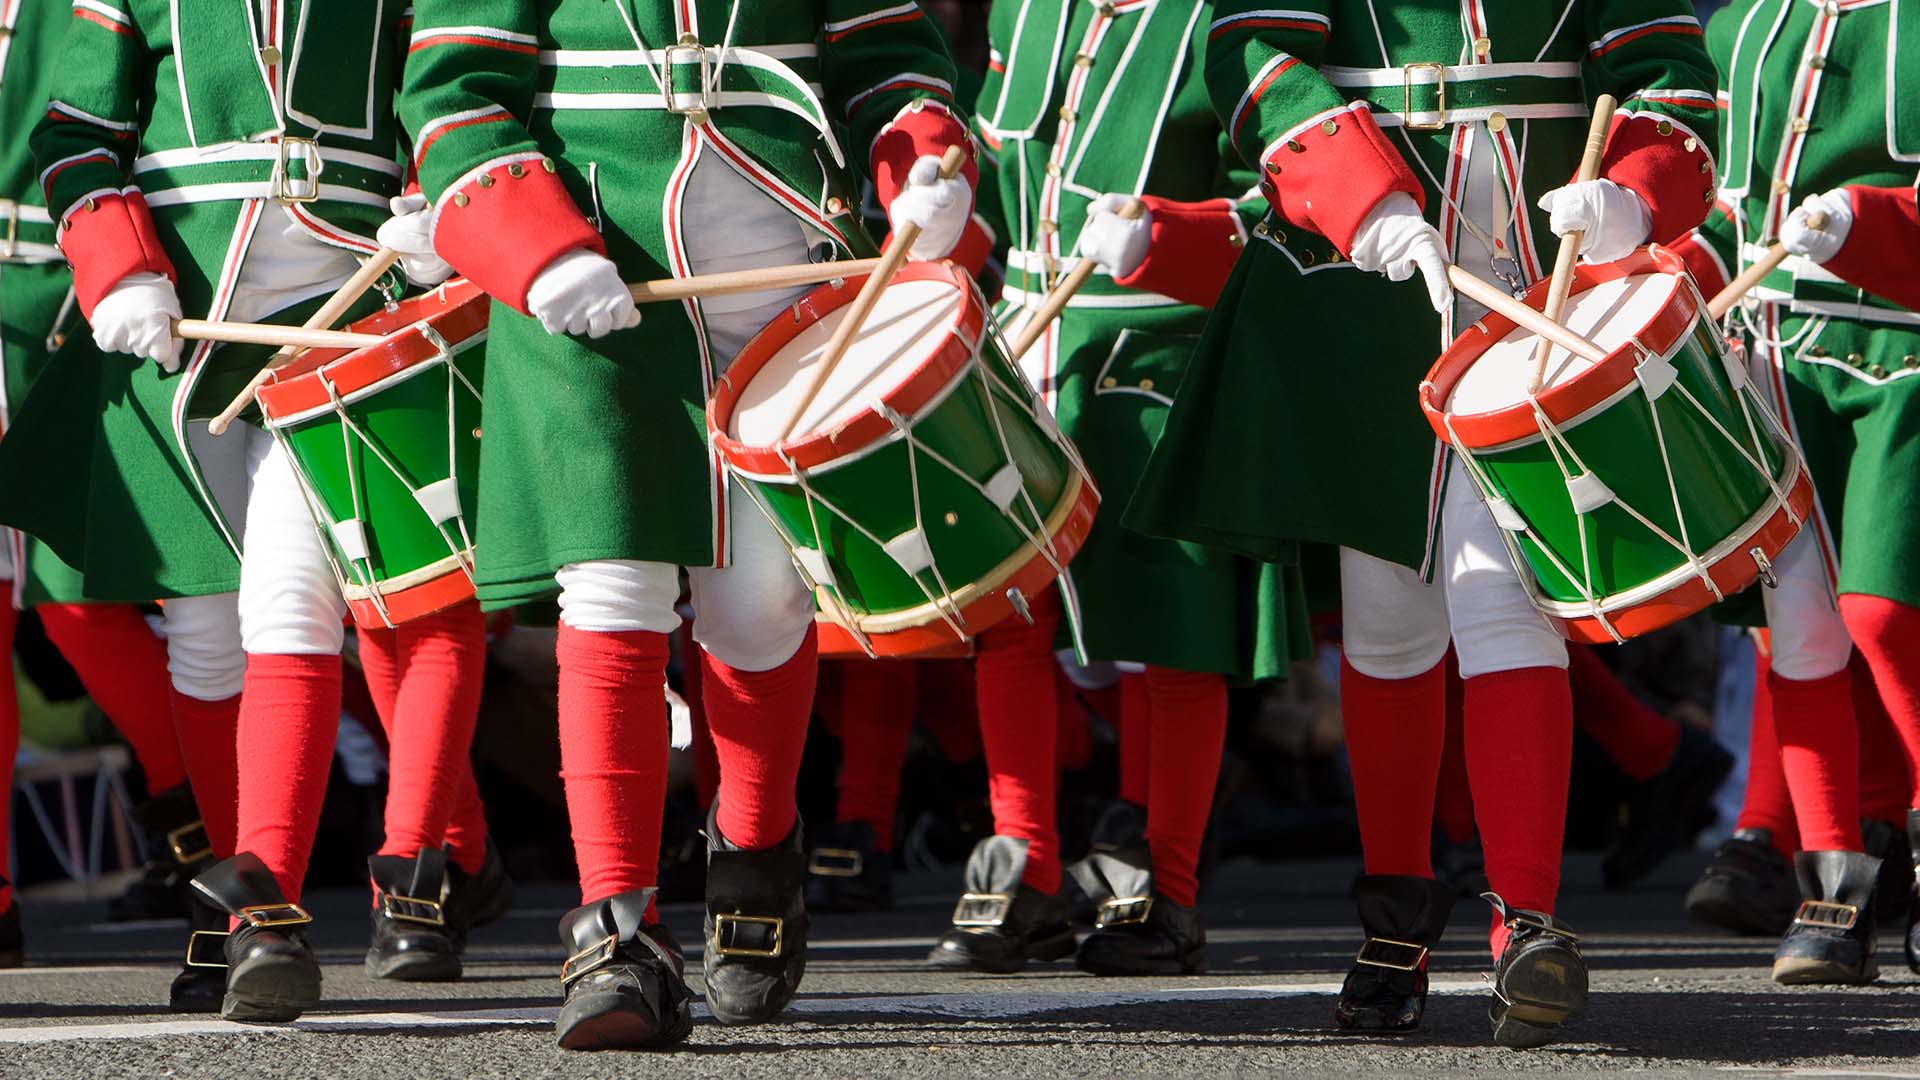 drummers dressed in green, white, and red parade in San Sebastian, Spain for the Tamborrada Festival